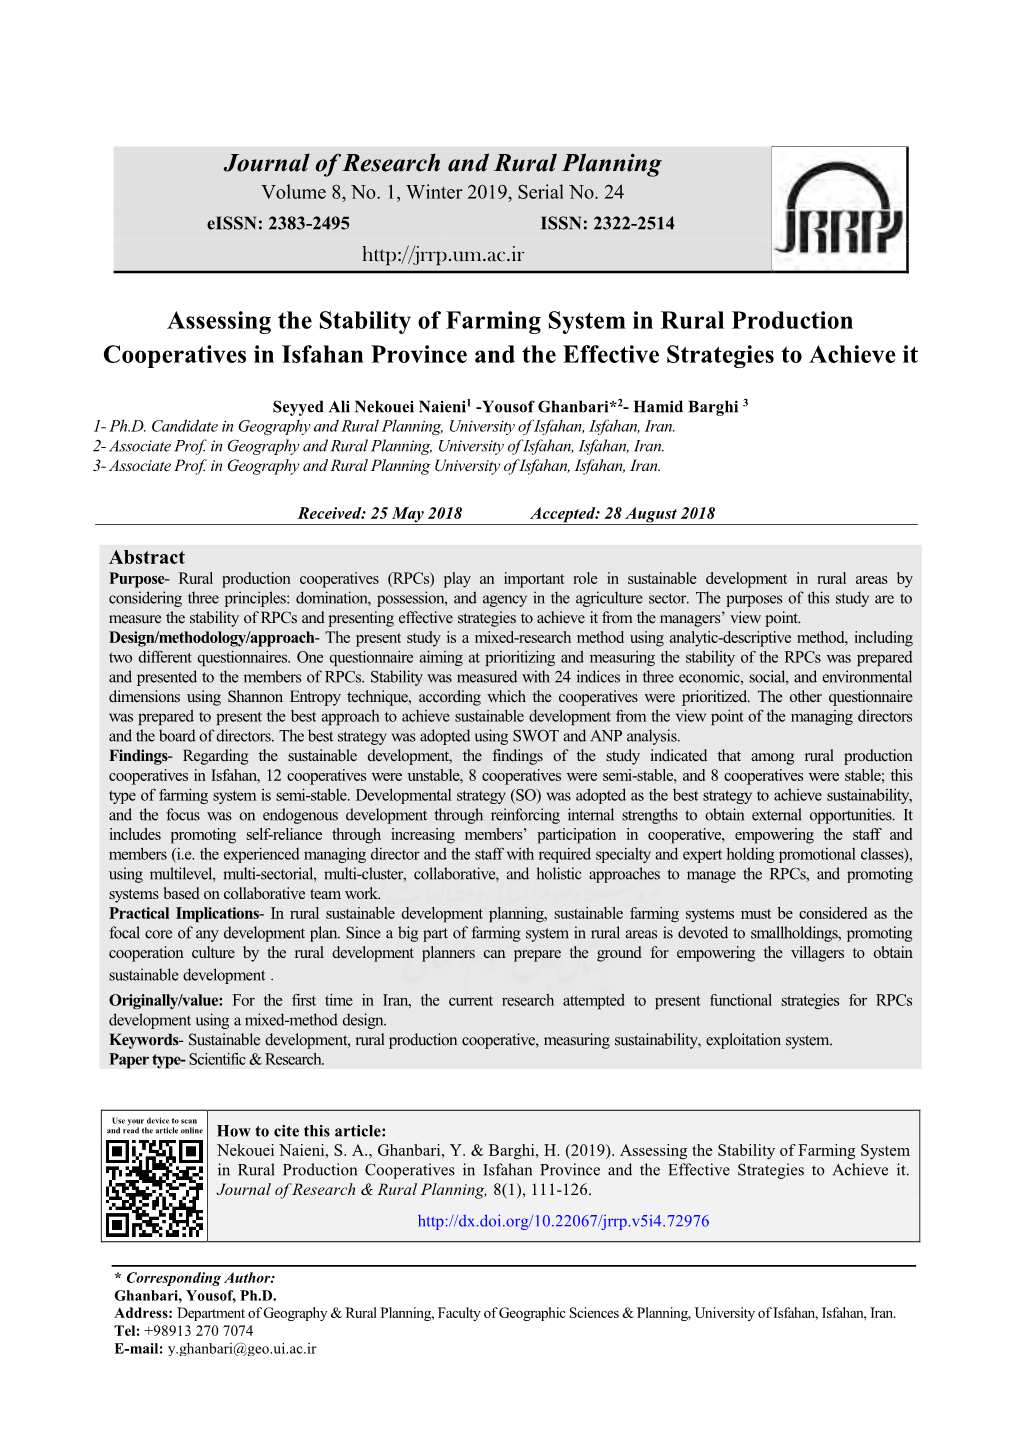 Journal of Research and Rural Planning Assessing the Stability Of